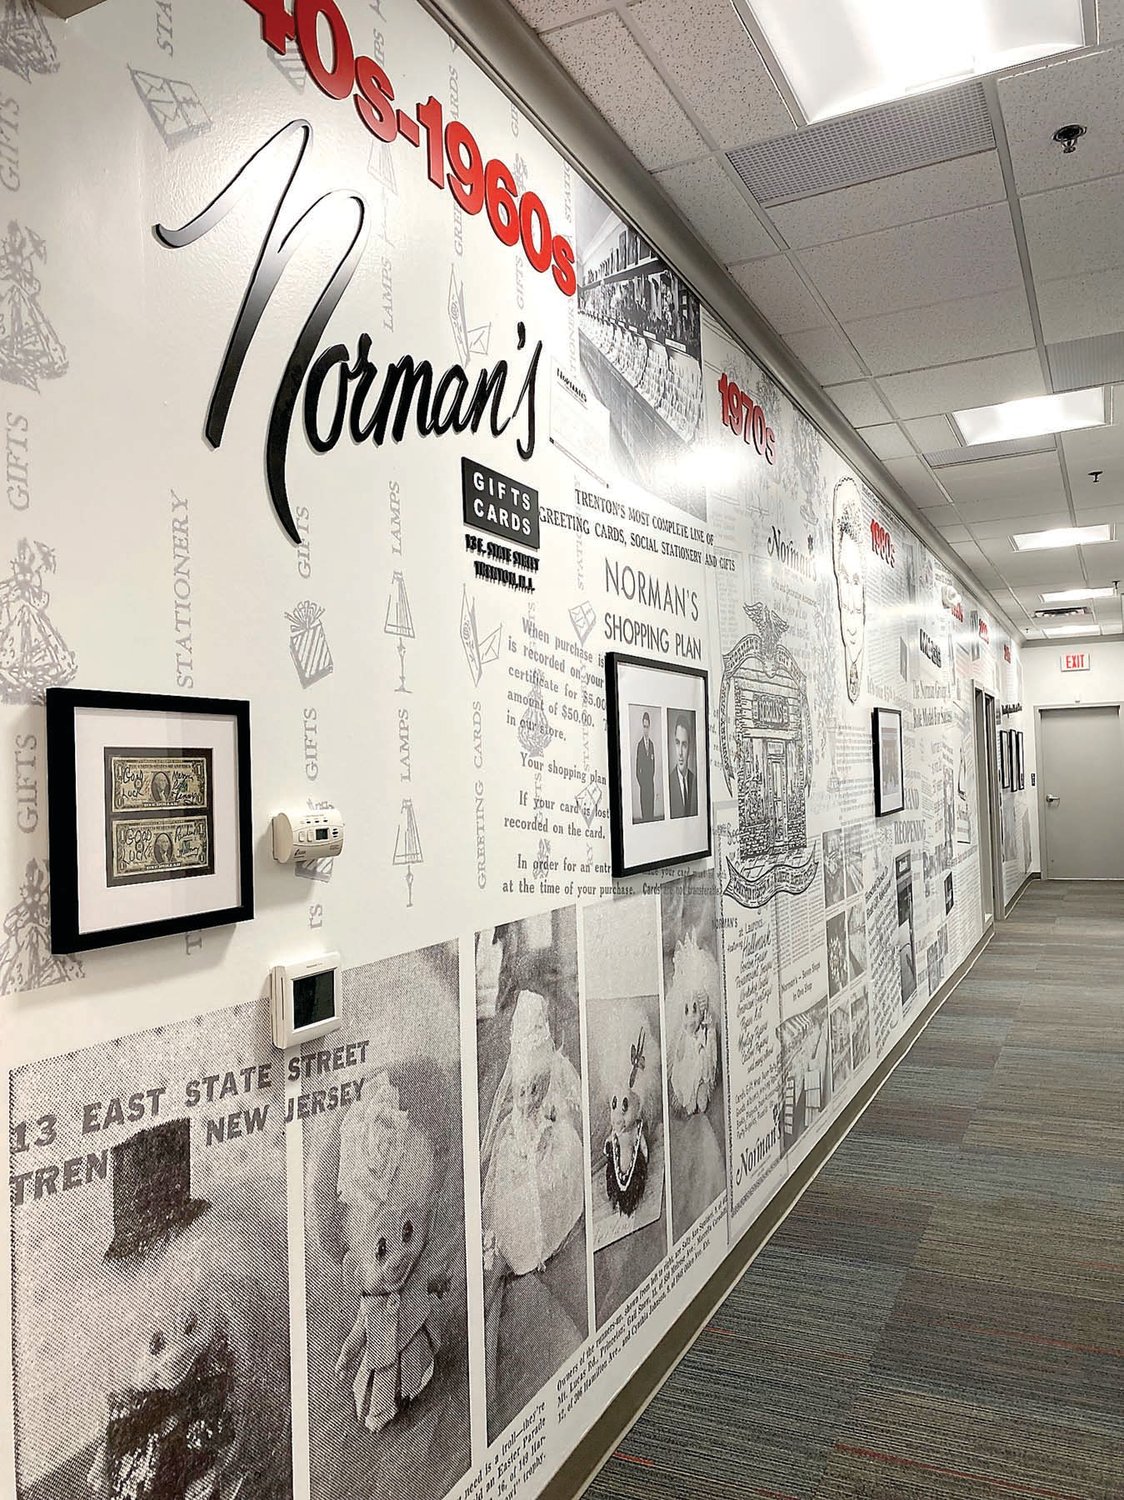 The newly unveiled legacy wall at Norman’s Hallmark headquarters in Newtown provides a veritable walk through time spanning more than eight decades.